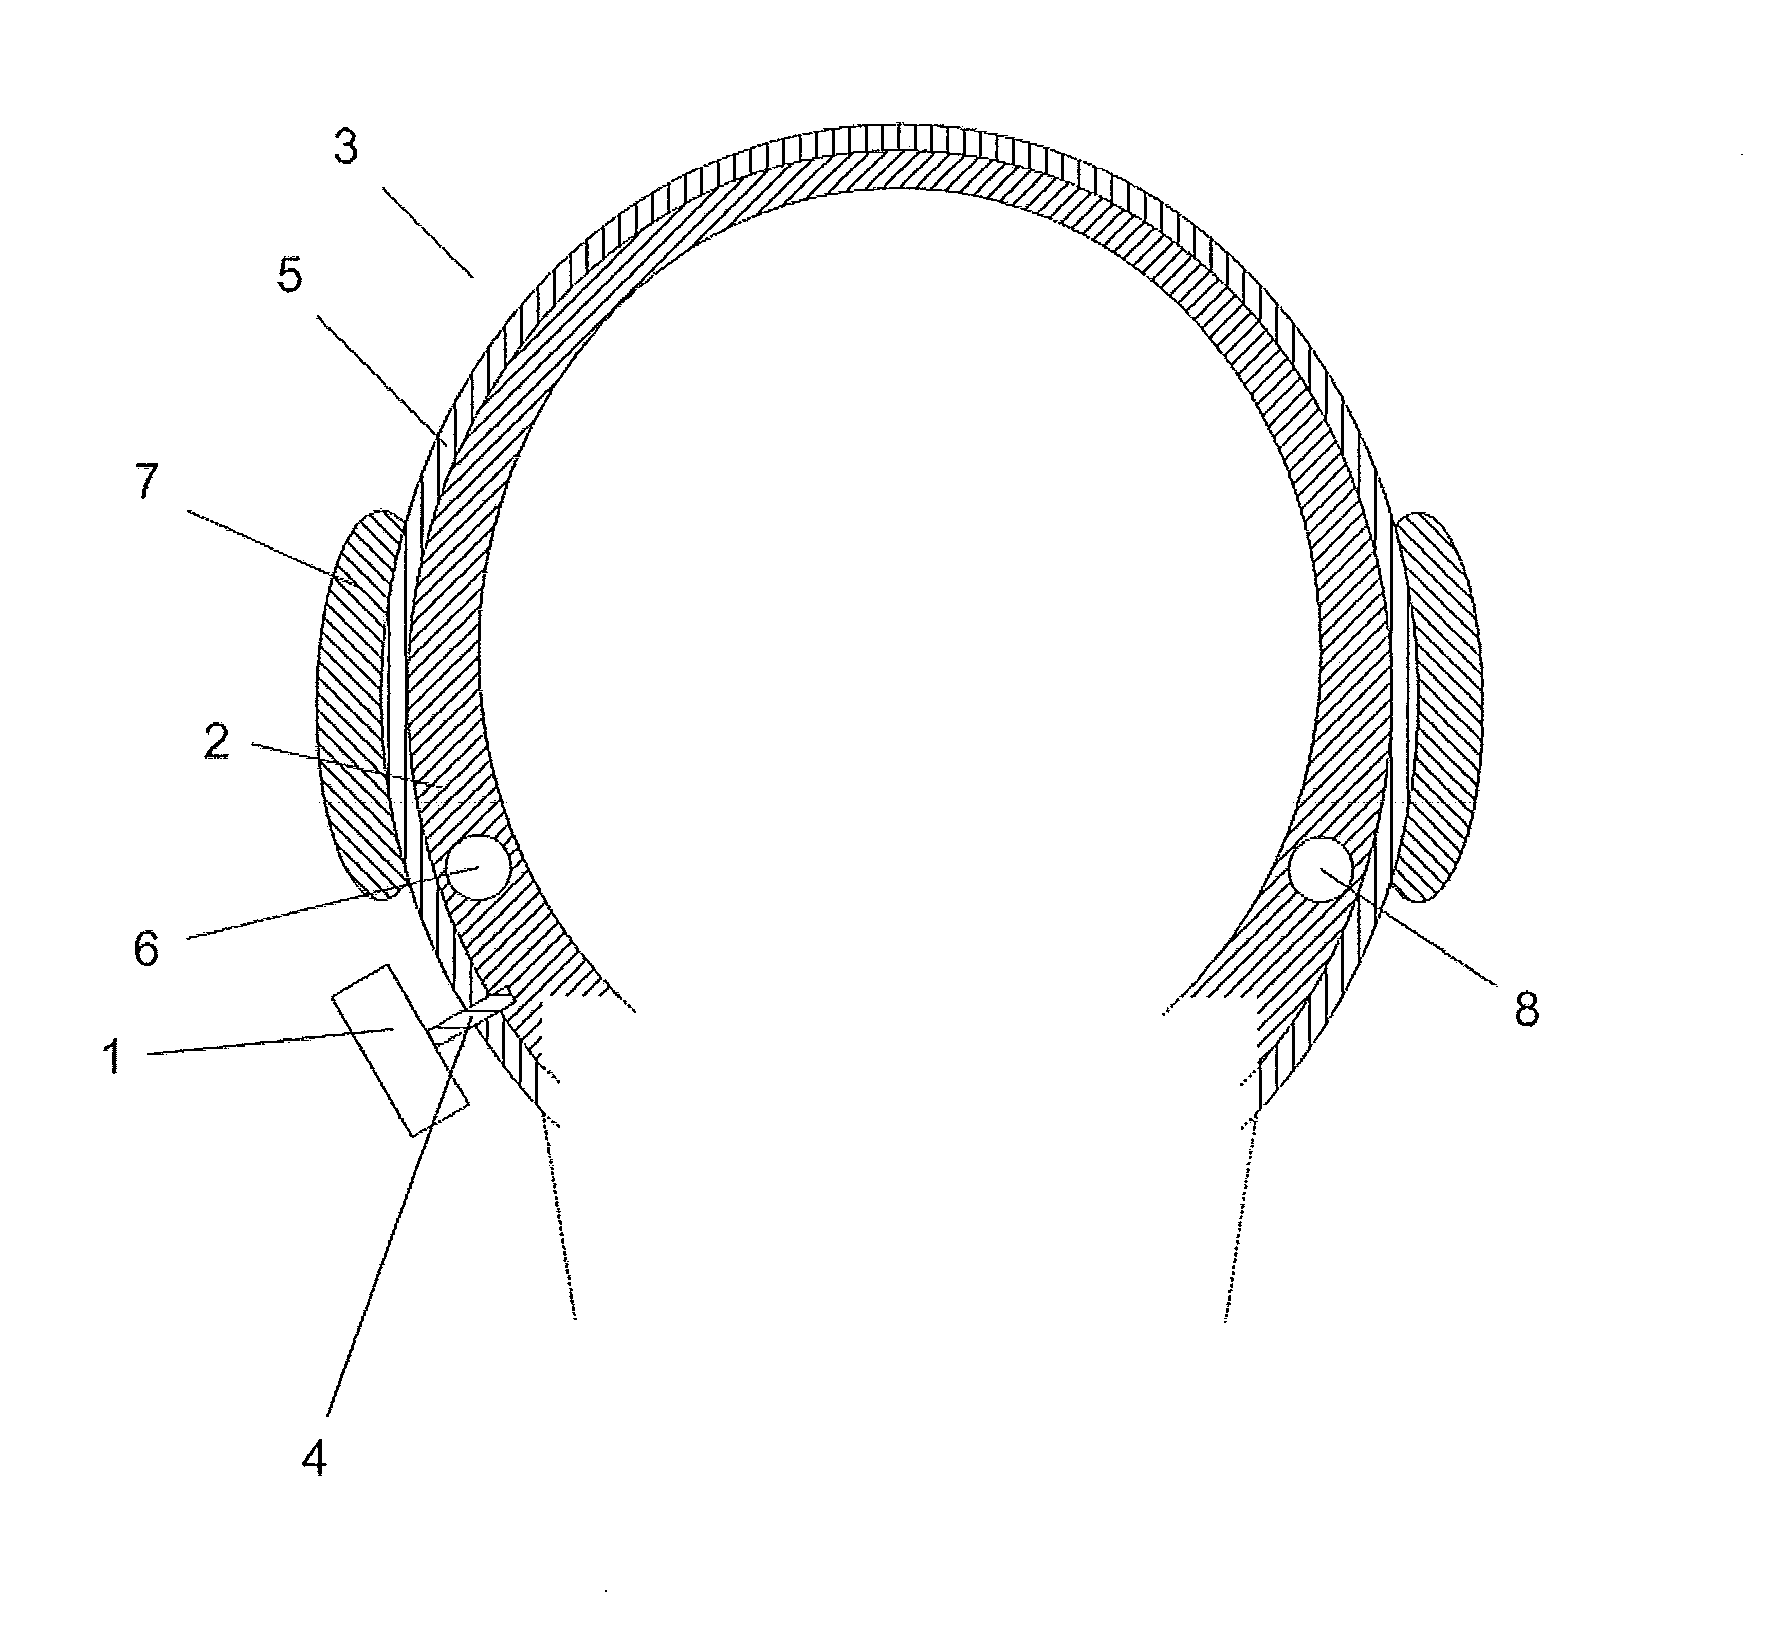 Device and method for applying a vibration signal to a human skull bone